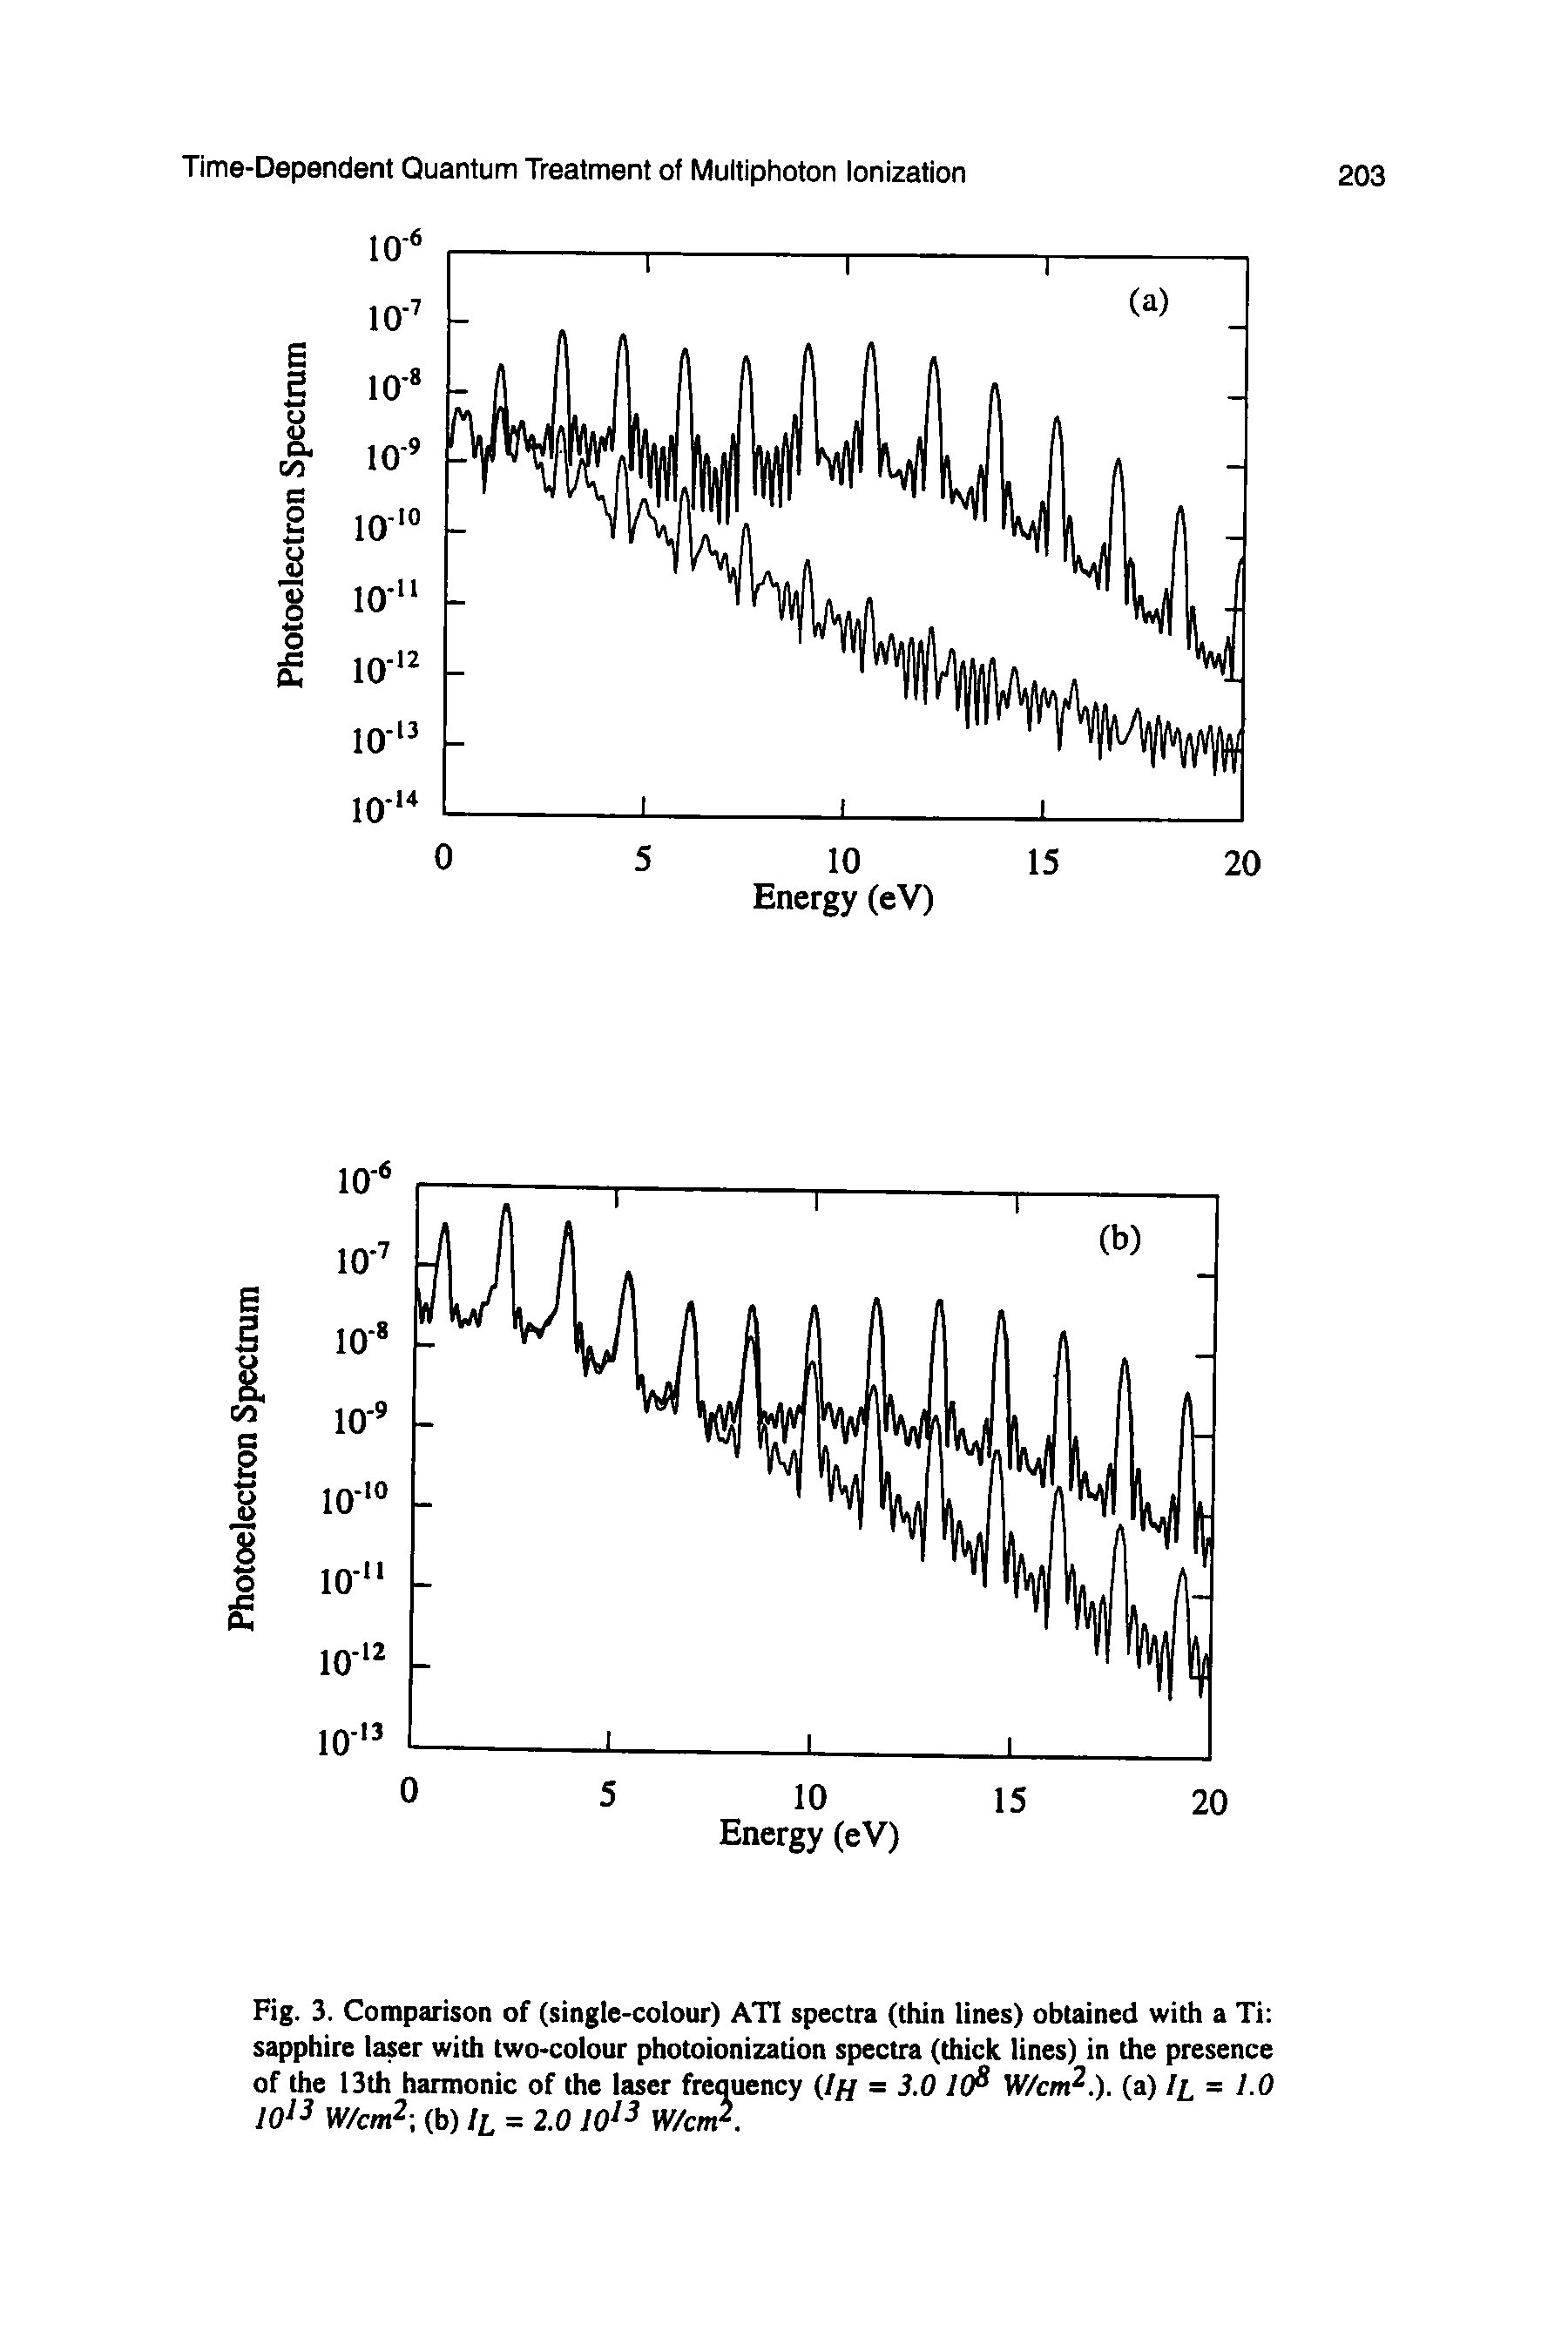 Fig. 3. Comparison of (single-colour) ATI spectra (thin lines) obtained with a Ti sapphire laser with two-colour photoionization spectra (thick lines) in the presence of the 13th harmonic of the laser freouency (/// = 3.0 10 W/cm. ). (a) 1 = 1.0 10 W/cn (b) li = 2.0 10 W/cm. ...